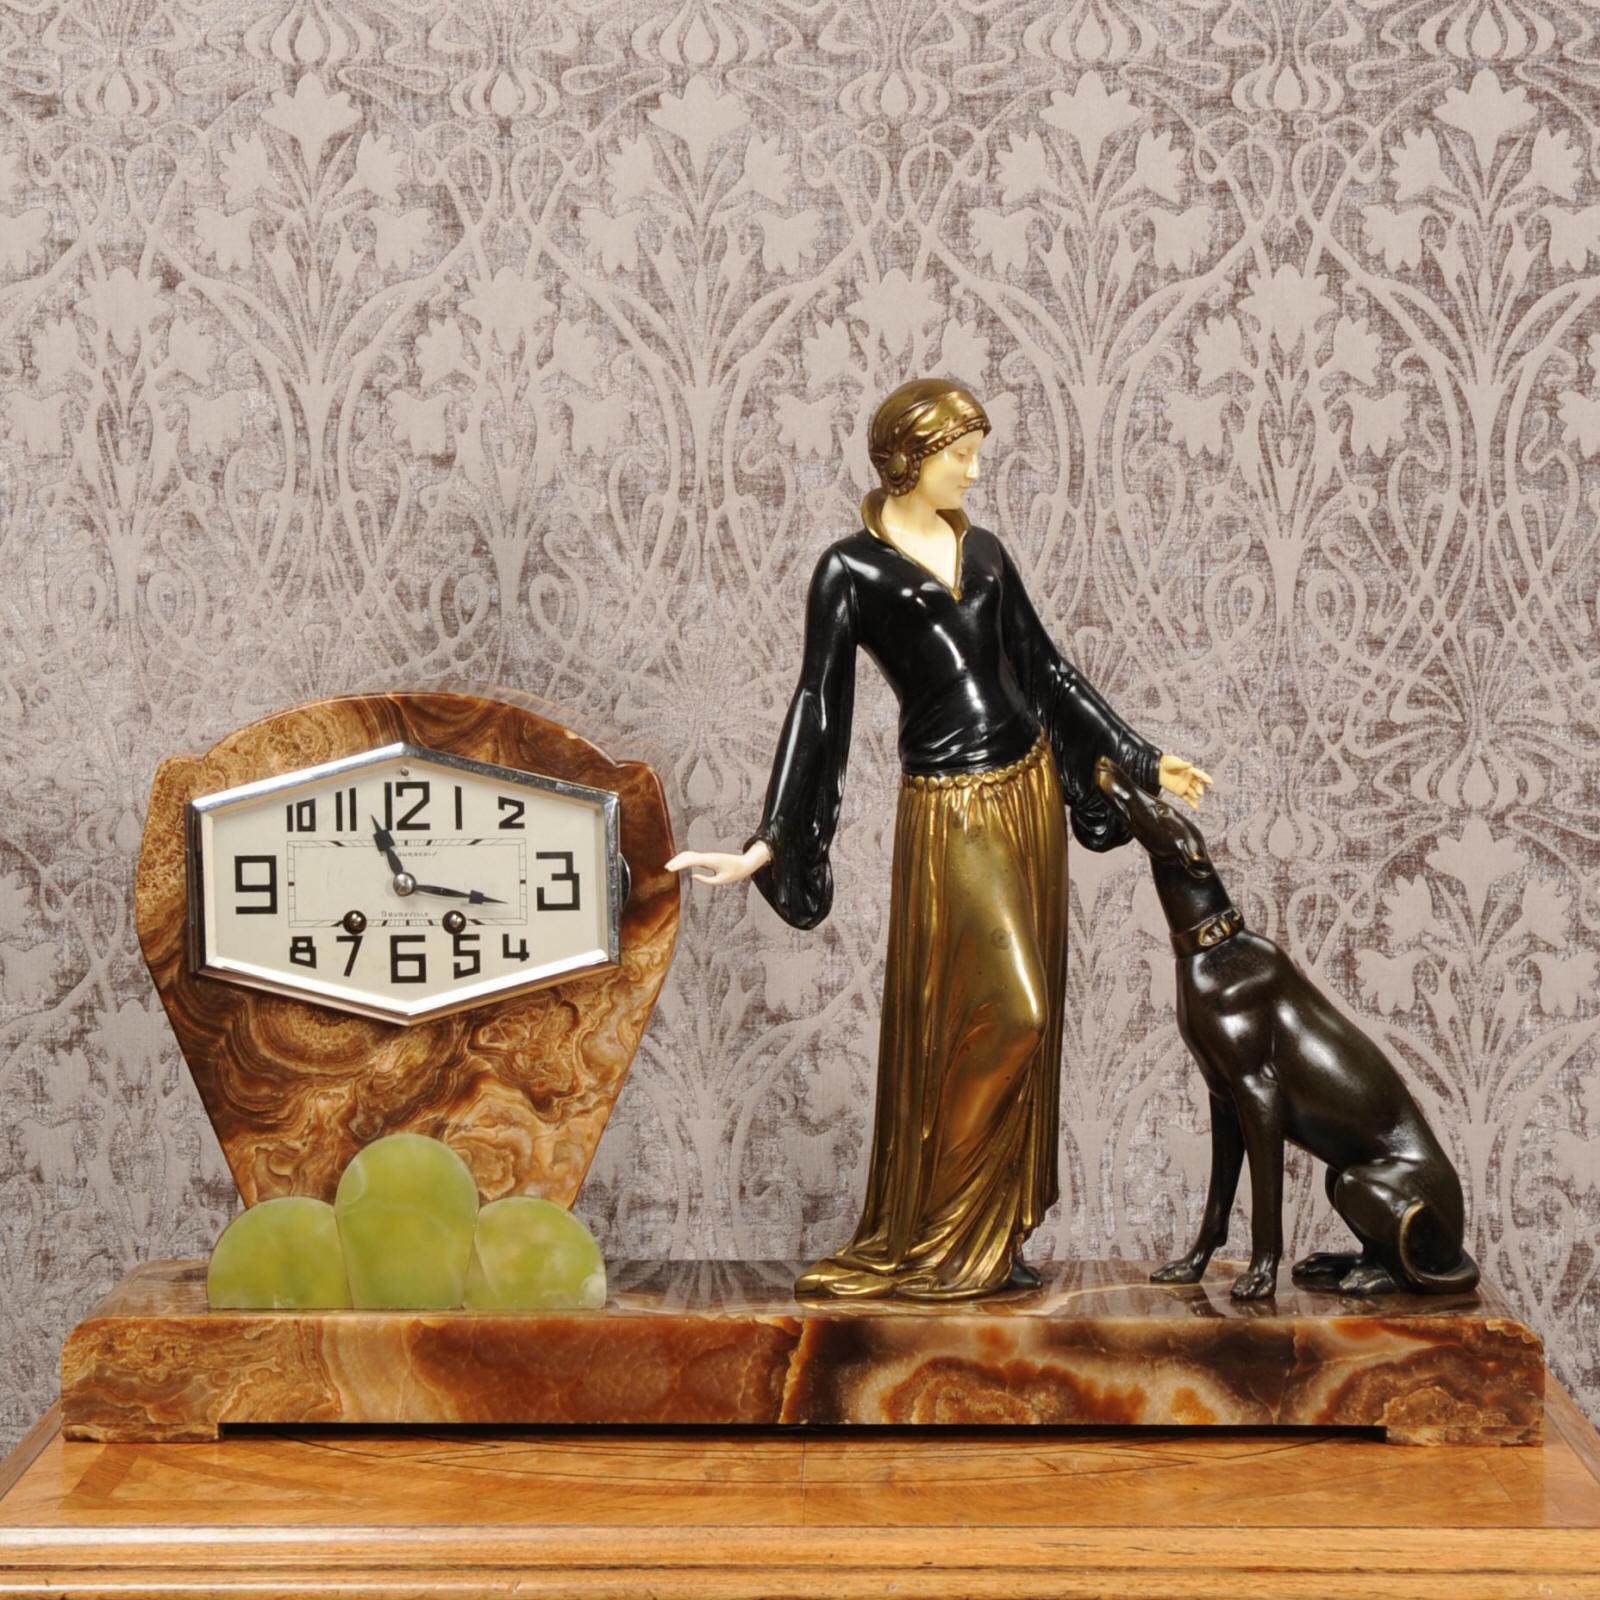 A large and superb Art Deco clock by Menneville (Urgo Cipriani), circa 1930. It features a stylish lady with her greyhound, standing beside the clock. She is modelled in patinated metal and her hands and head are delicately modelled in cream ivorine